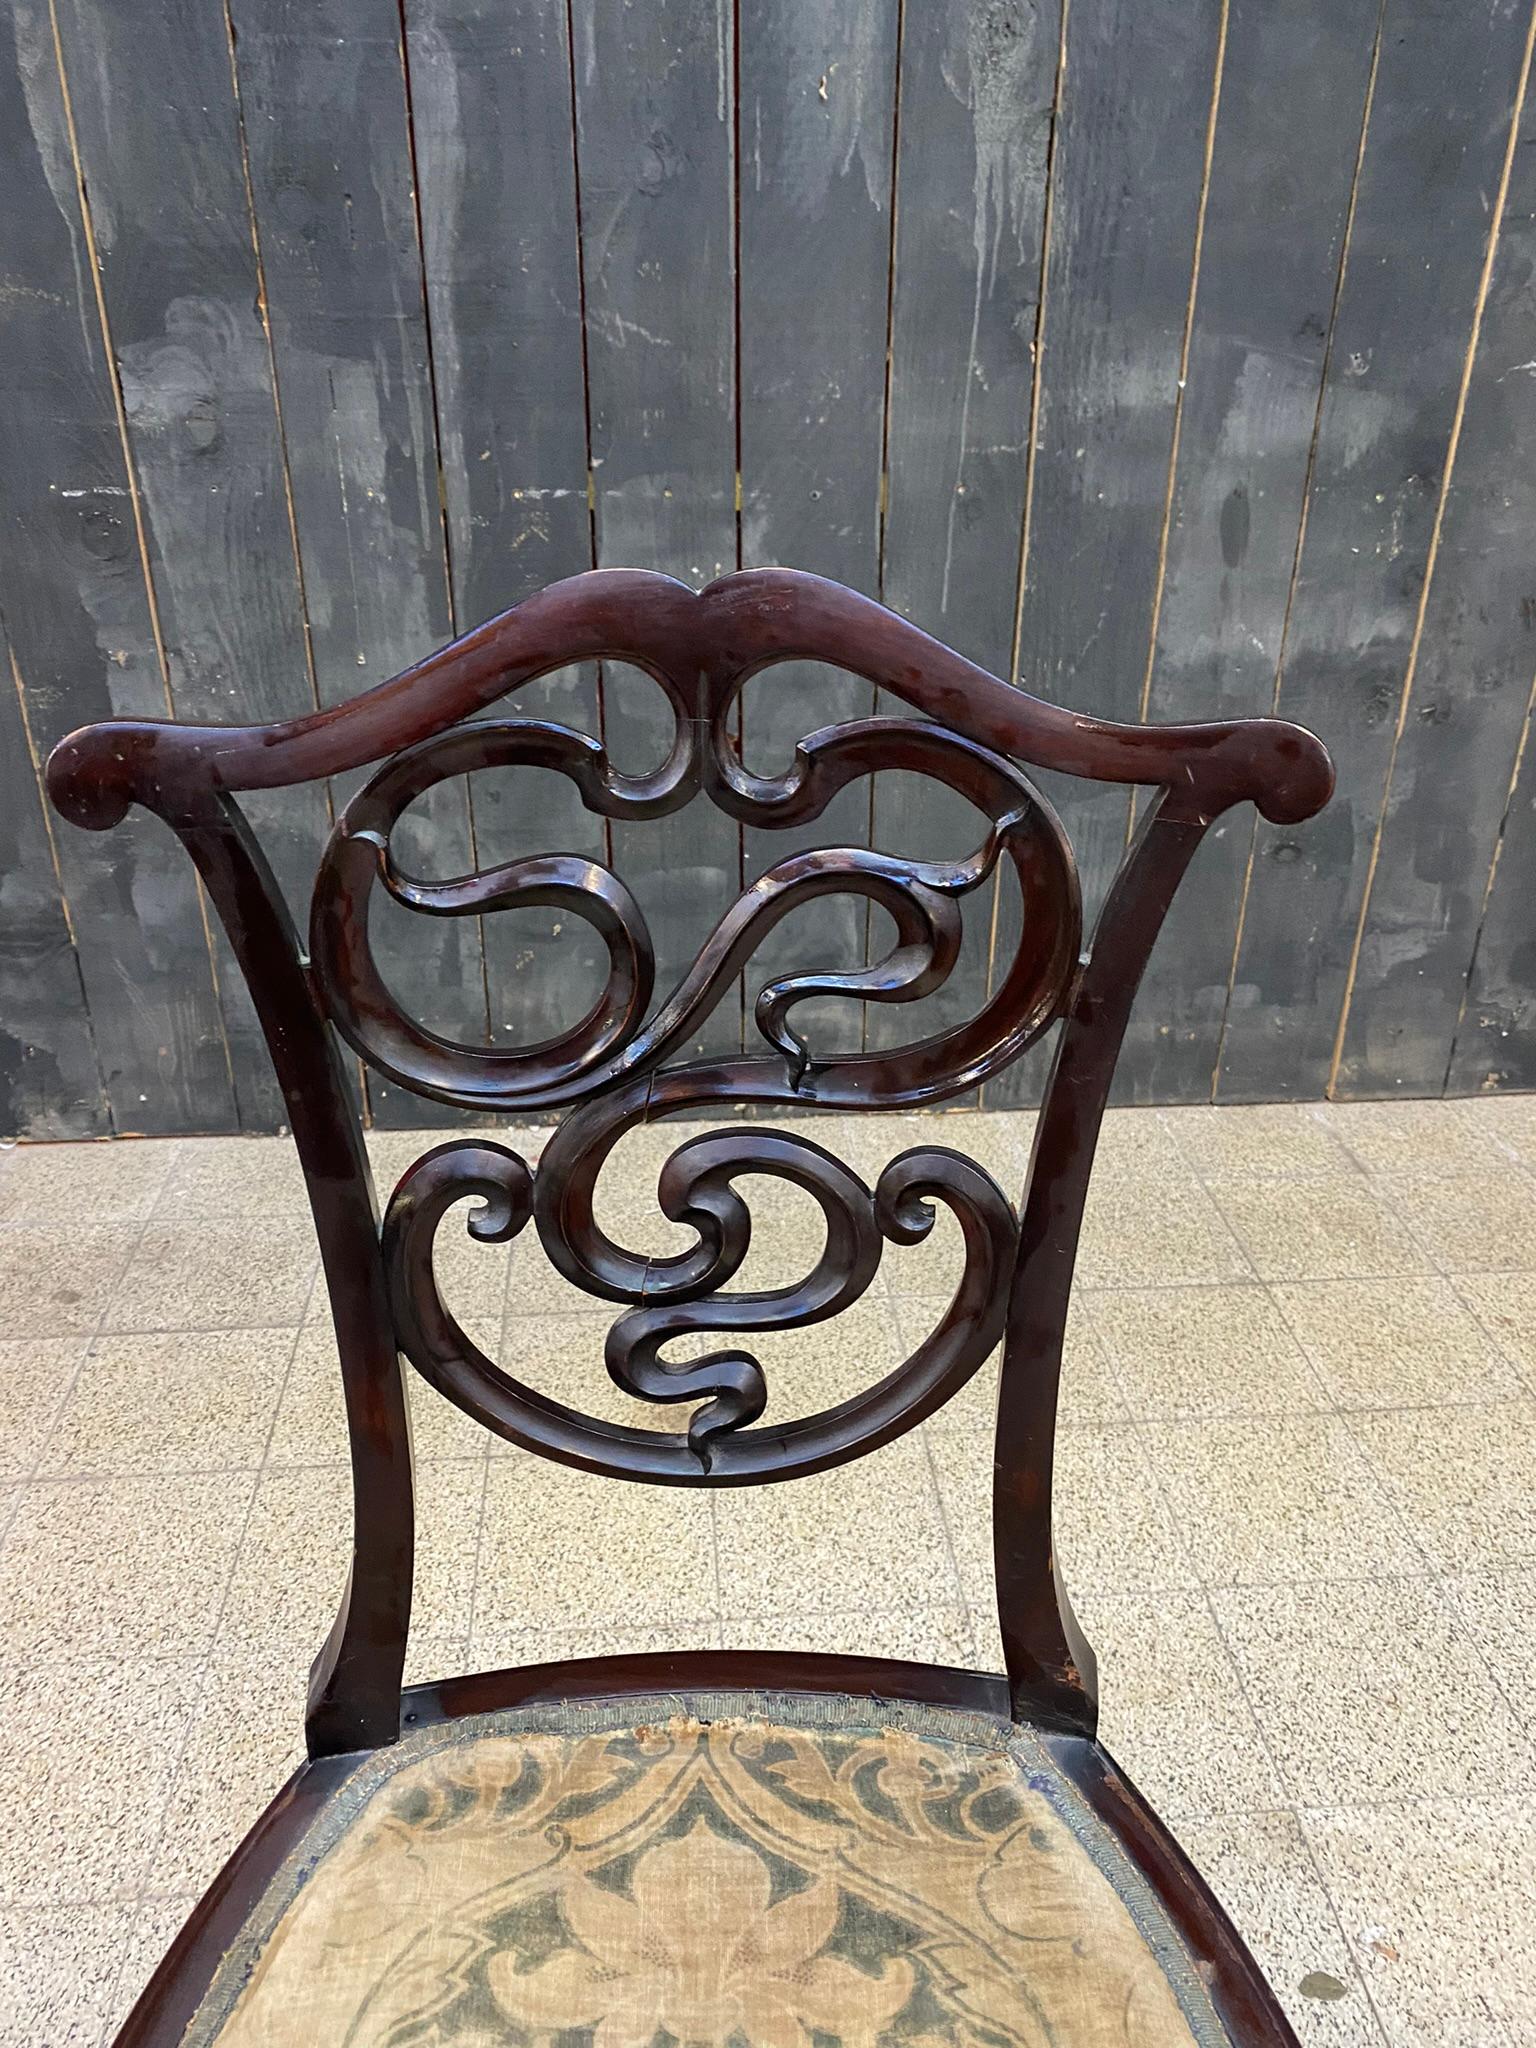 Chinoiserie Art Nouveau period chair with Chinese pattern circa 1880,  For Sale